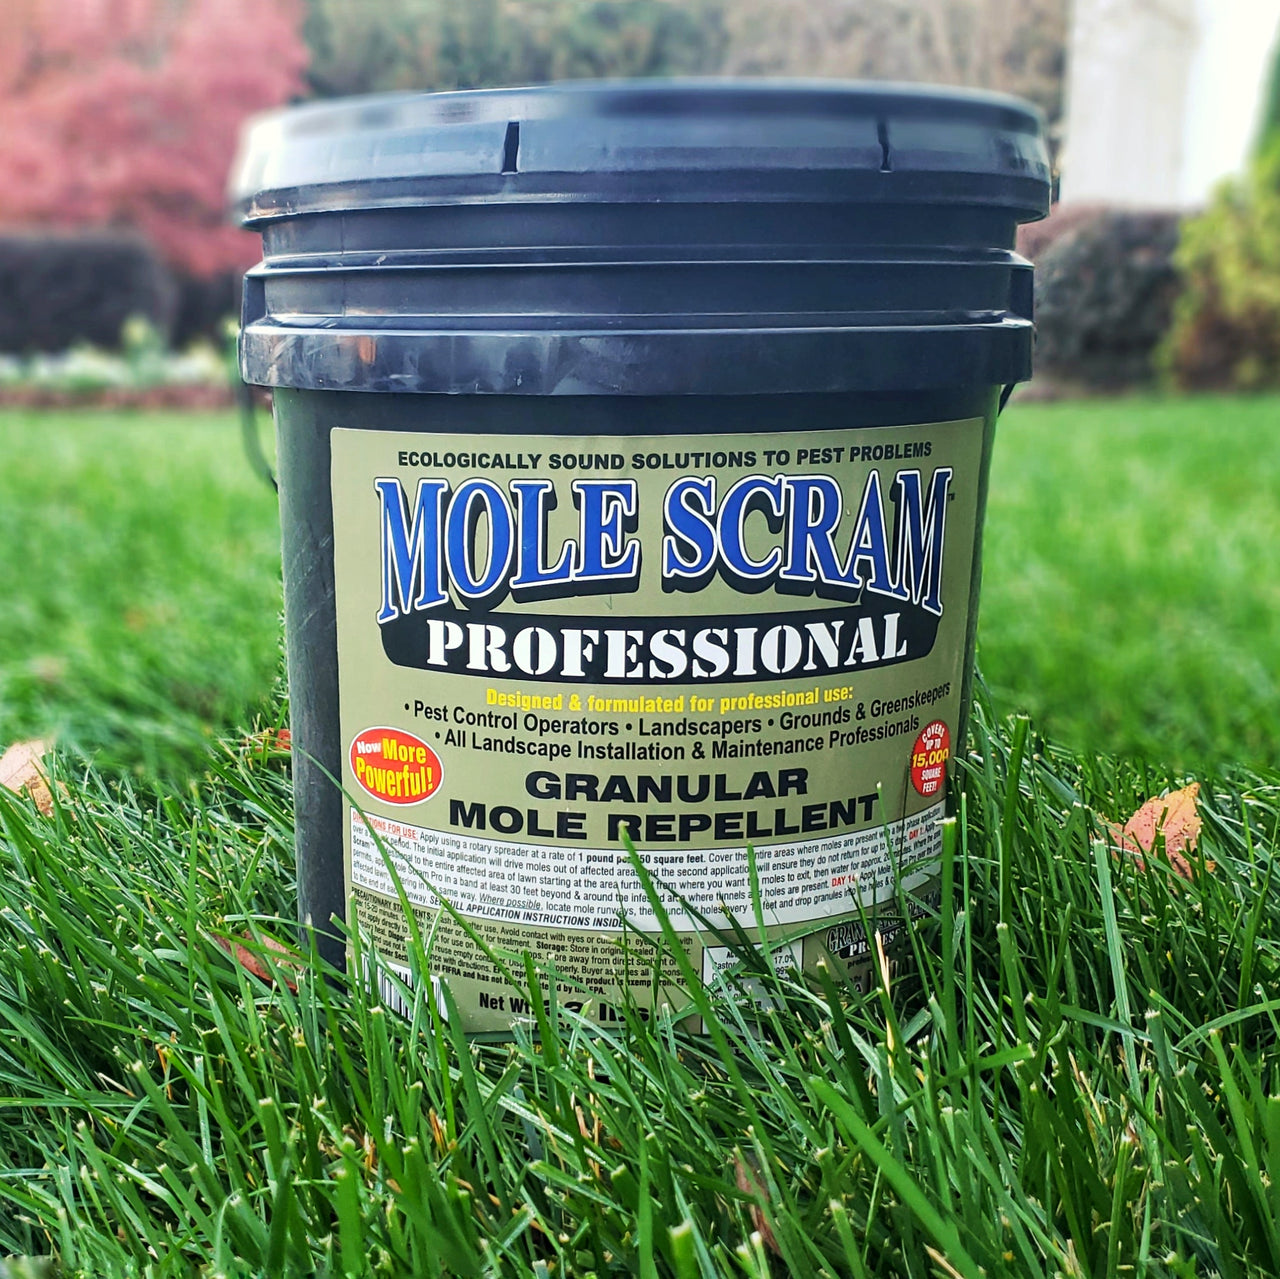 Professional Mole Scram: Best Way to Keep Moles Out of Your Garden or Lawn